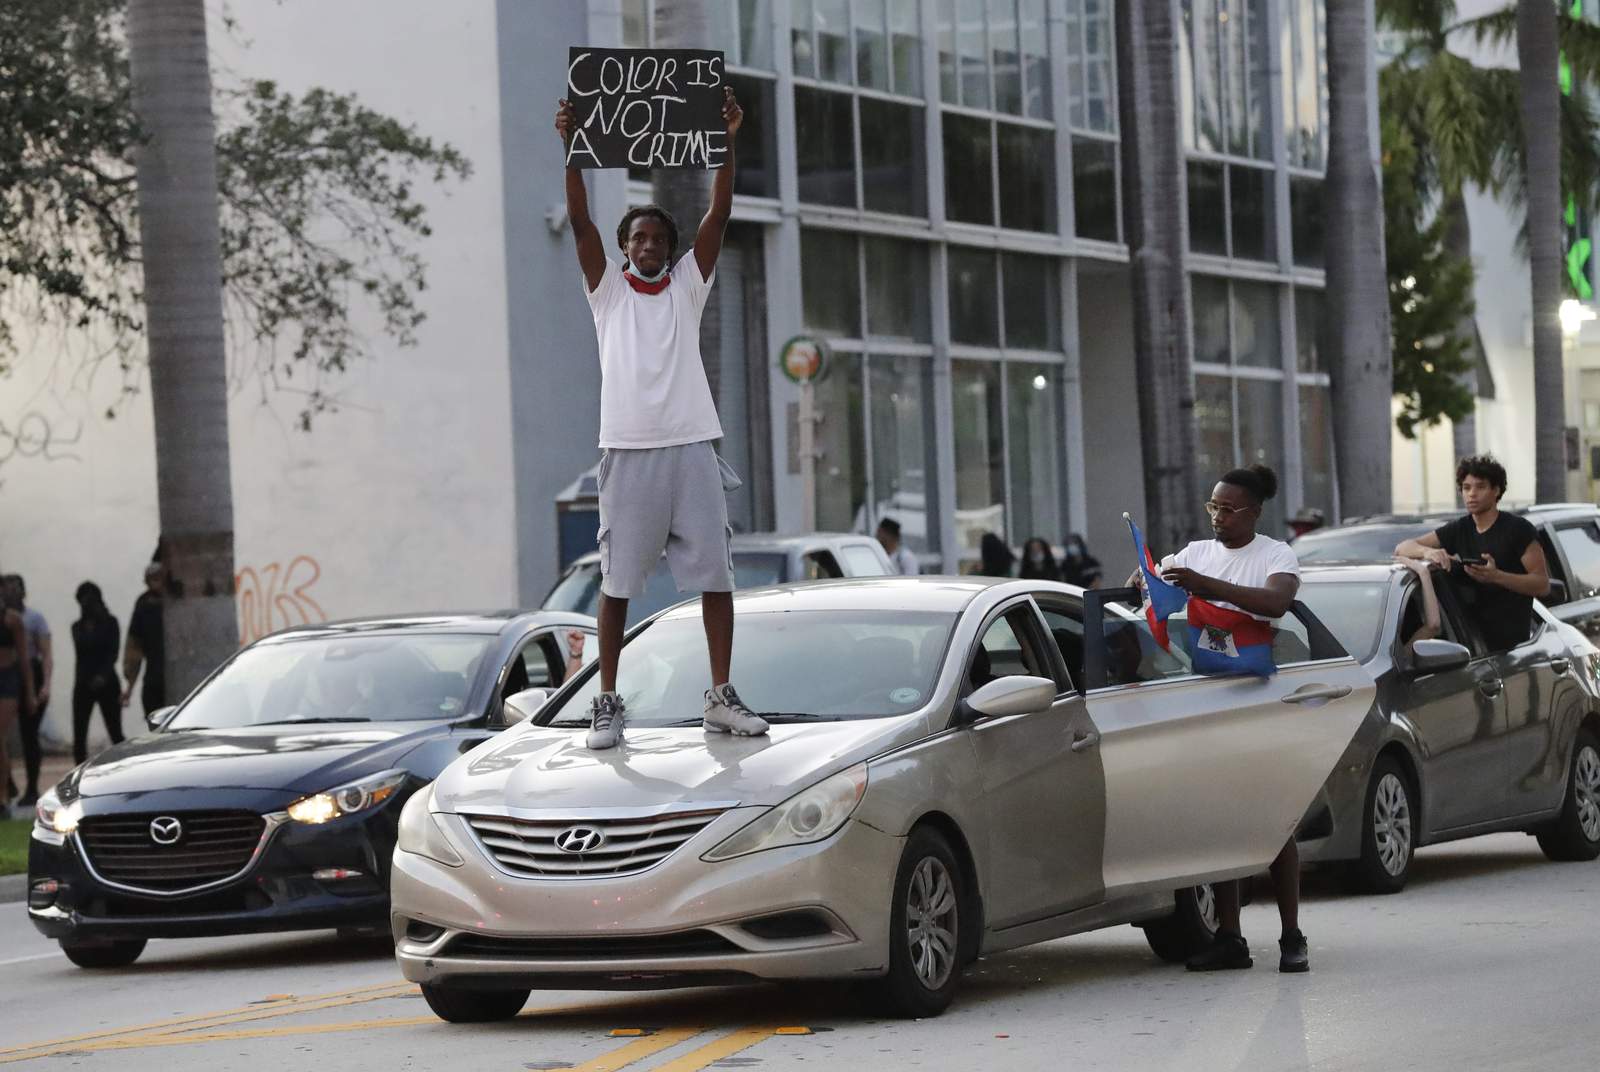 South Floridas professional sports teams speak out following George Floyd death, protests